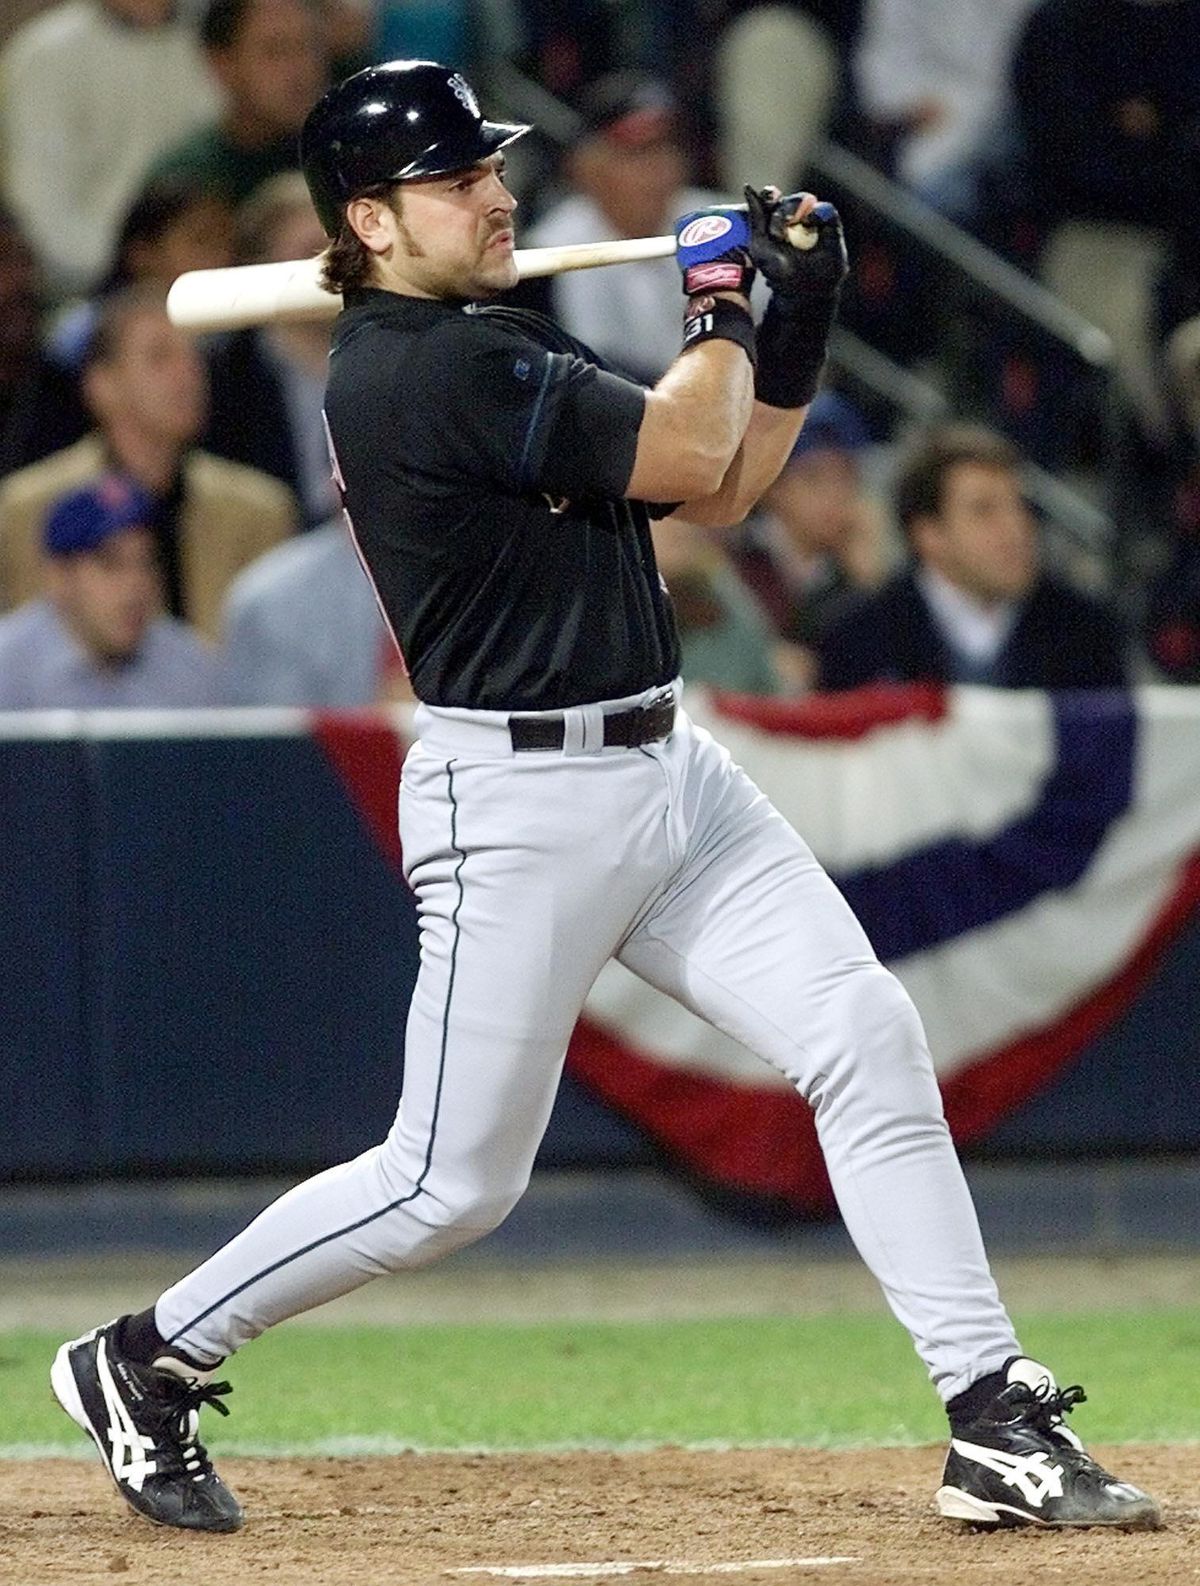 Catcher Mike Piazza of the New York Mets connects